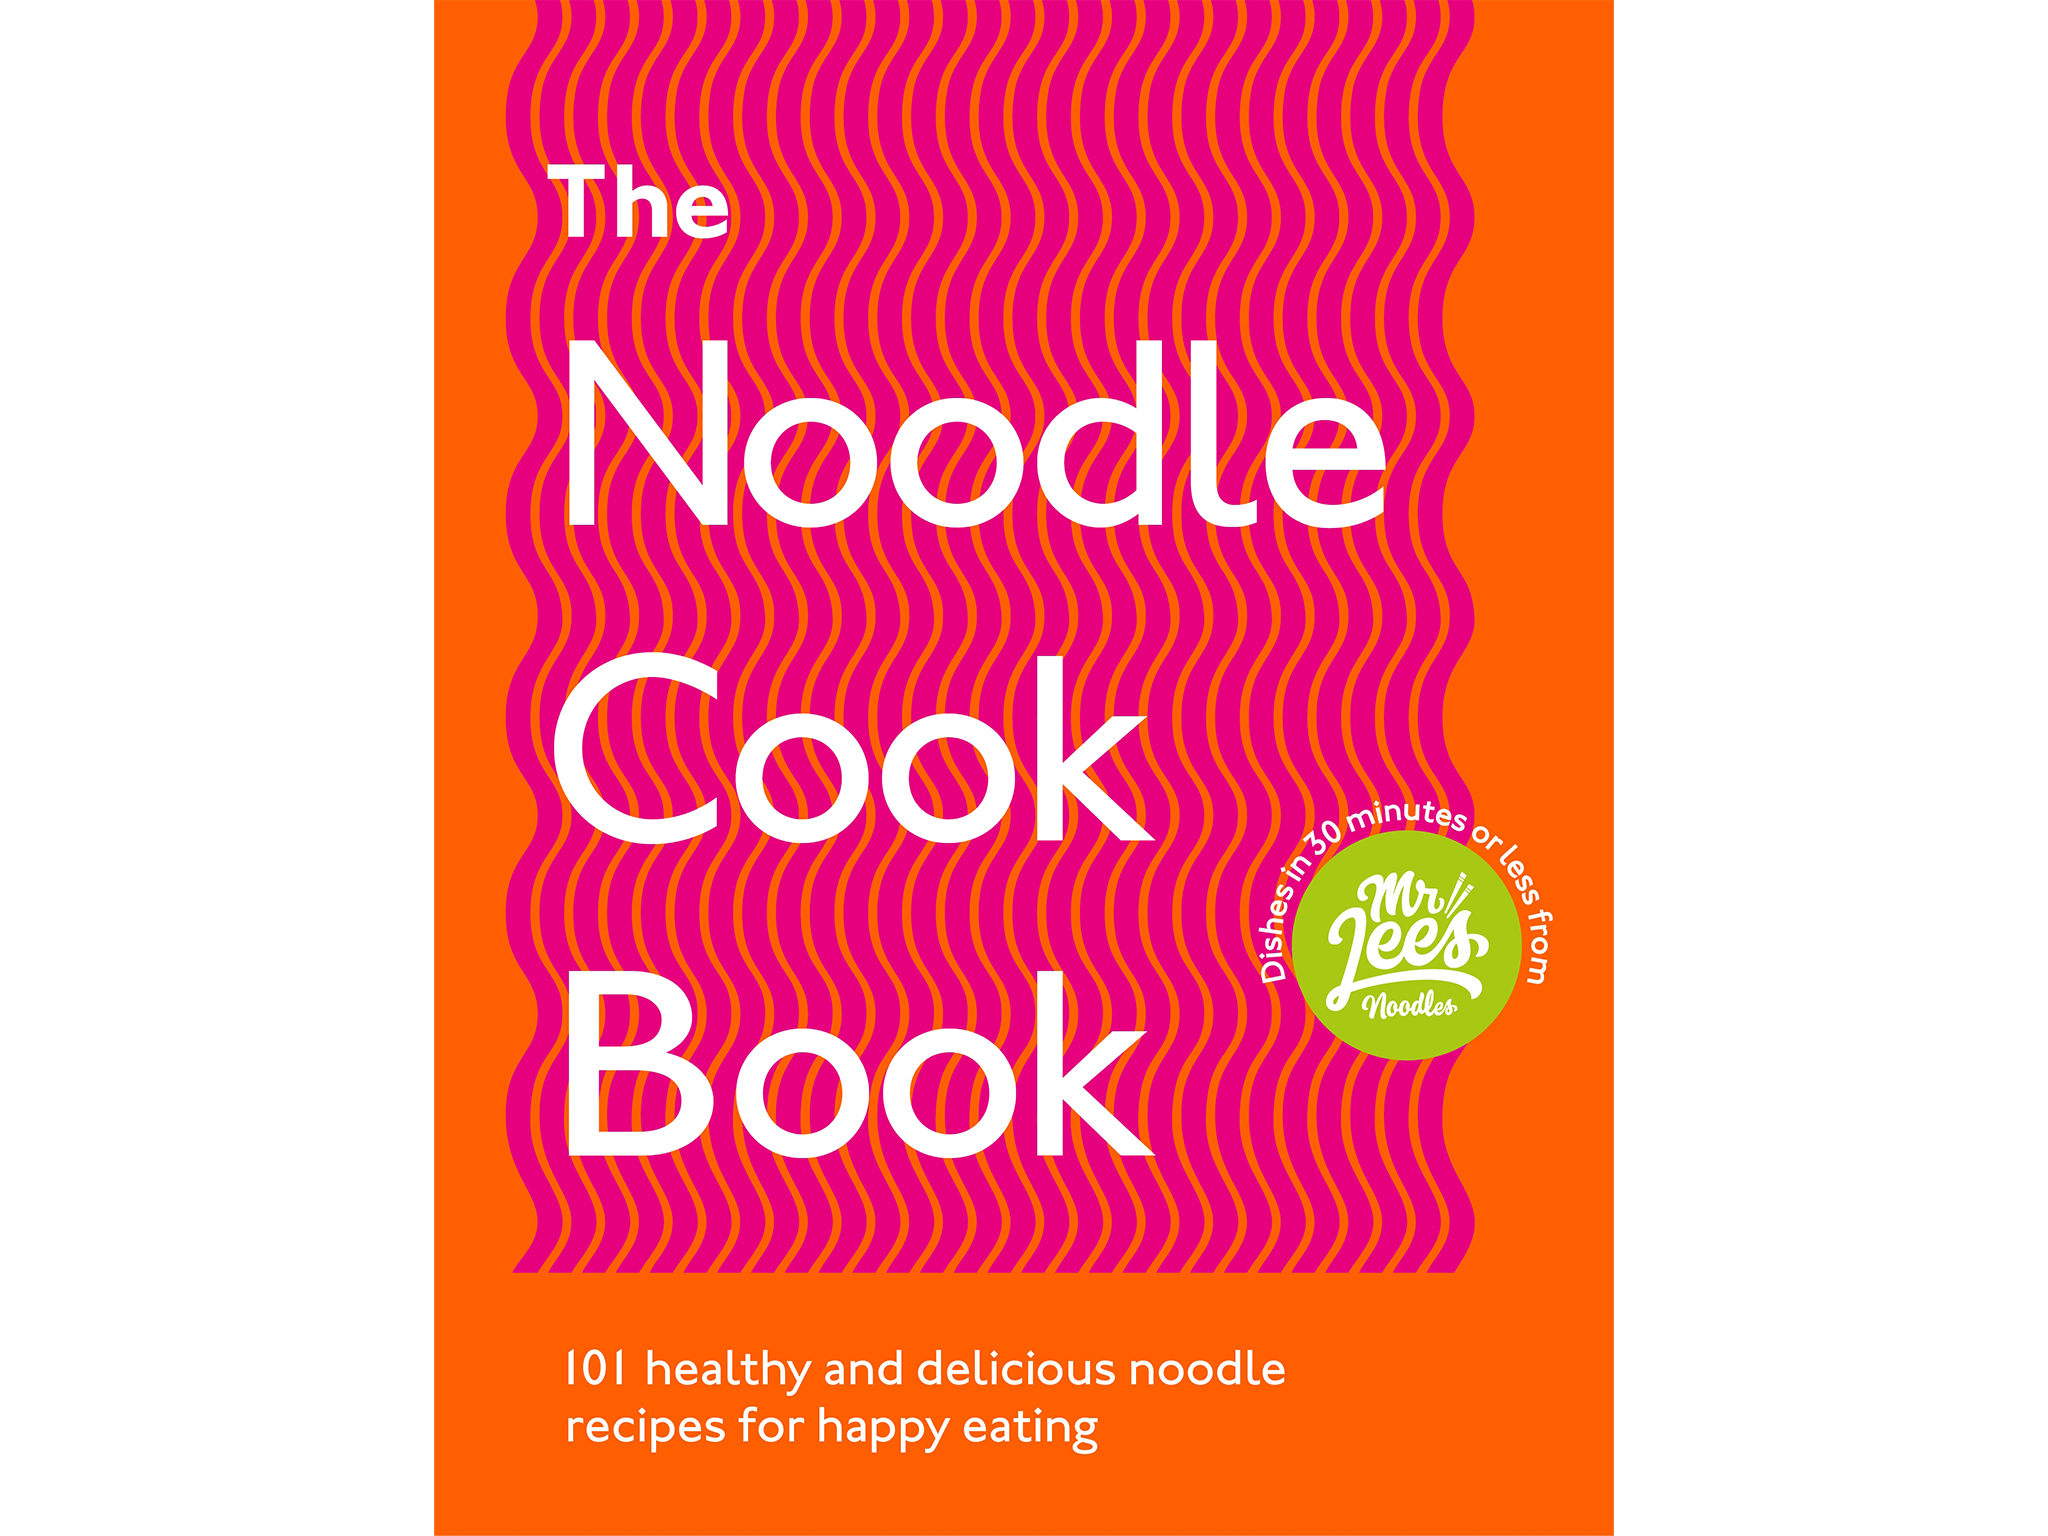 ‘THE NOODLE COOKBOOK’ BY MR LEE’S NOODLES, PUBLISHED BY EBURY PRESS PUBLISHING